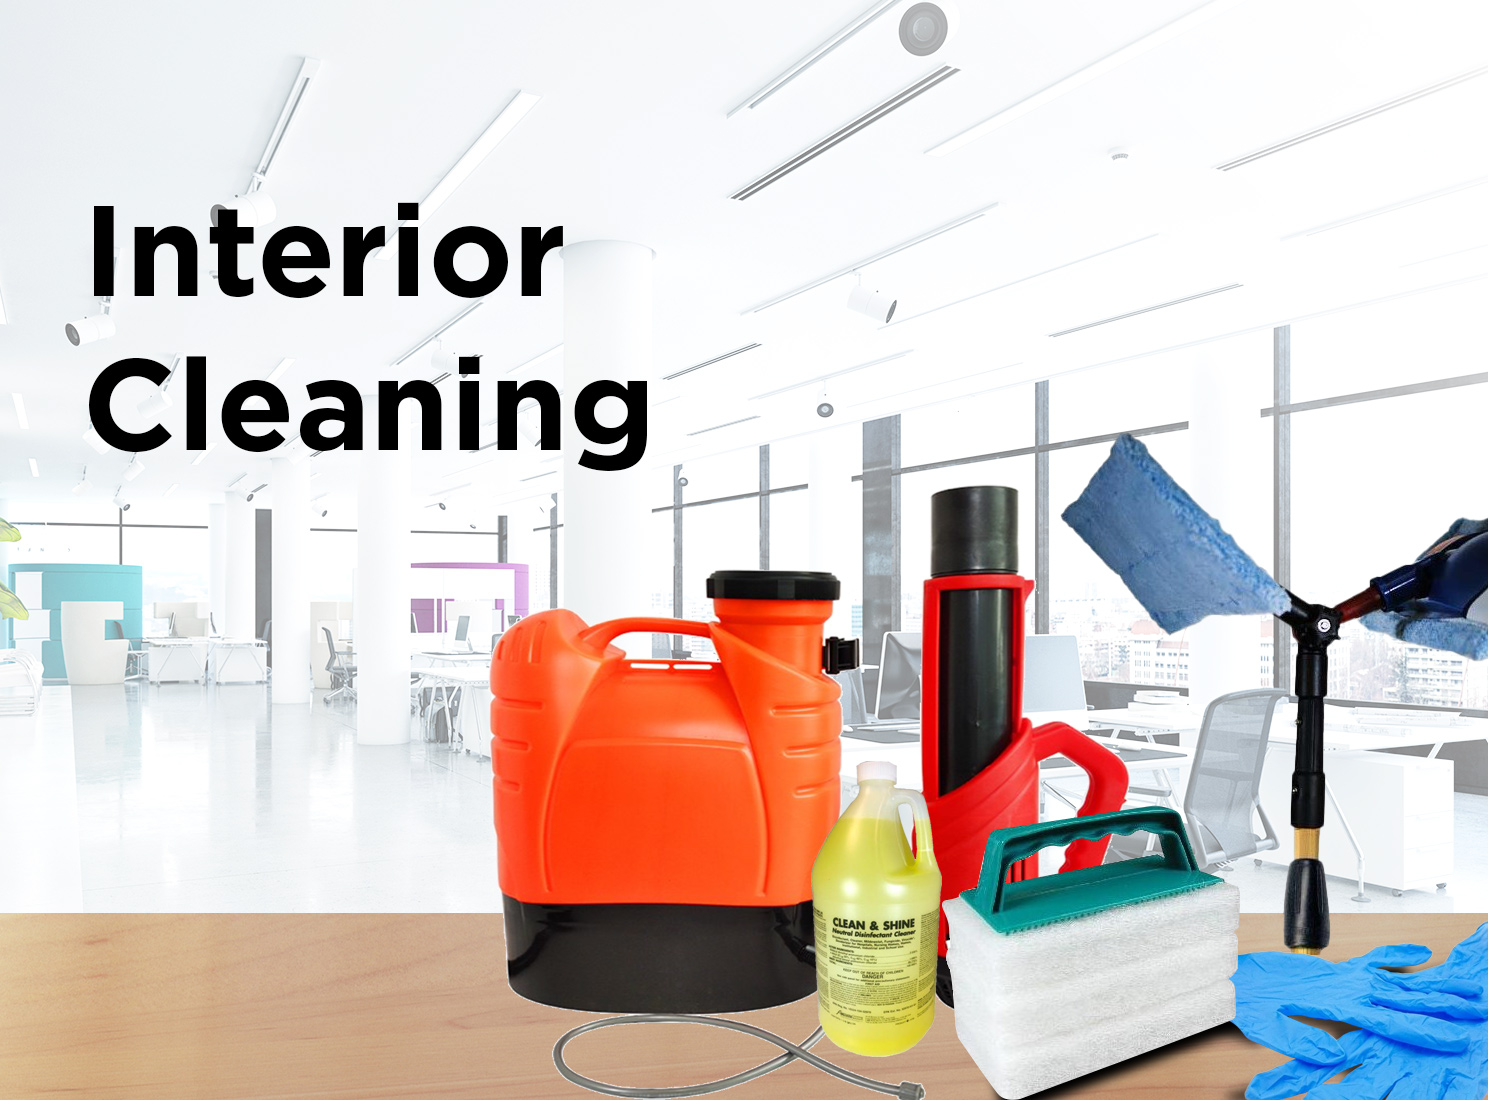 Interior Cleaning